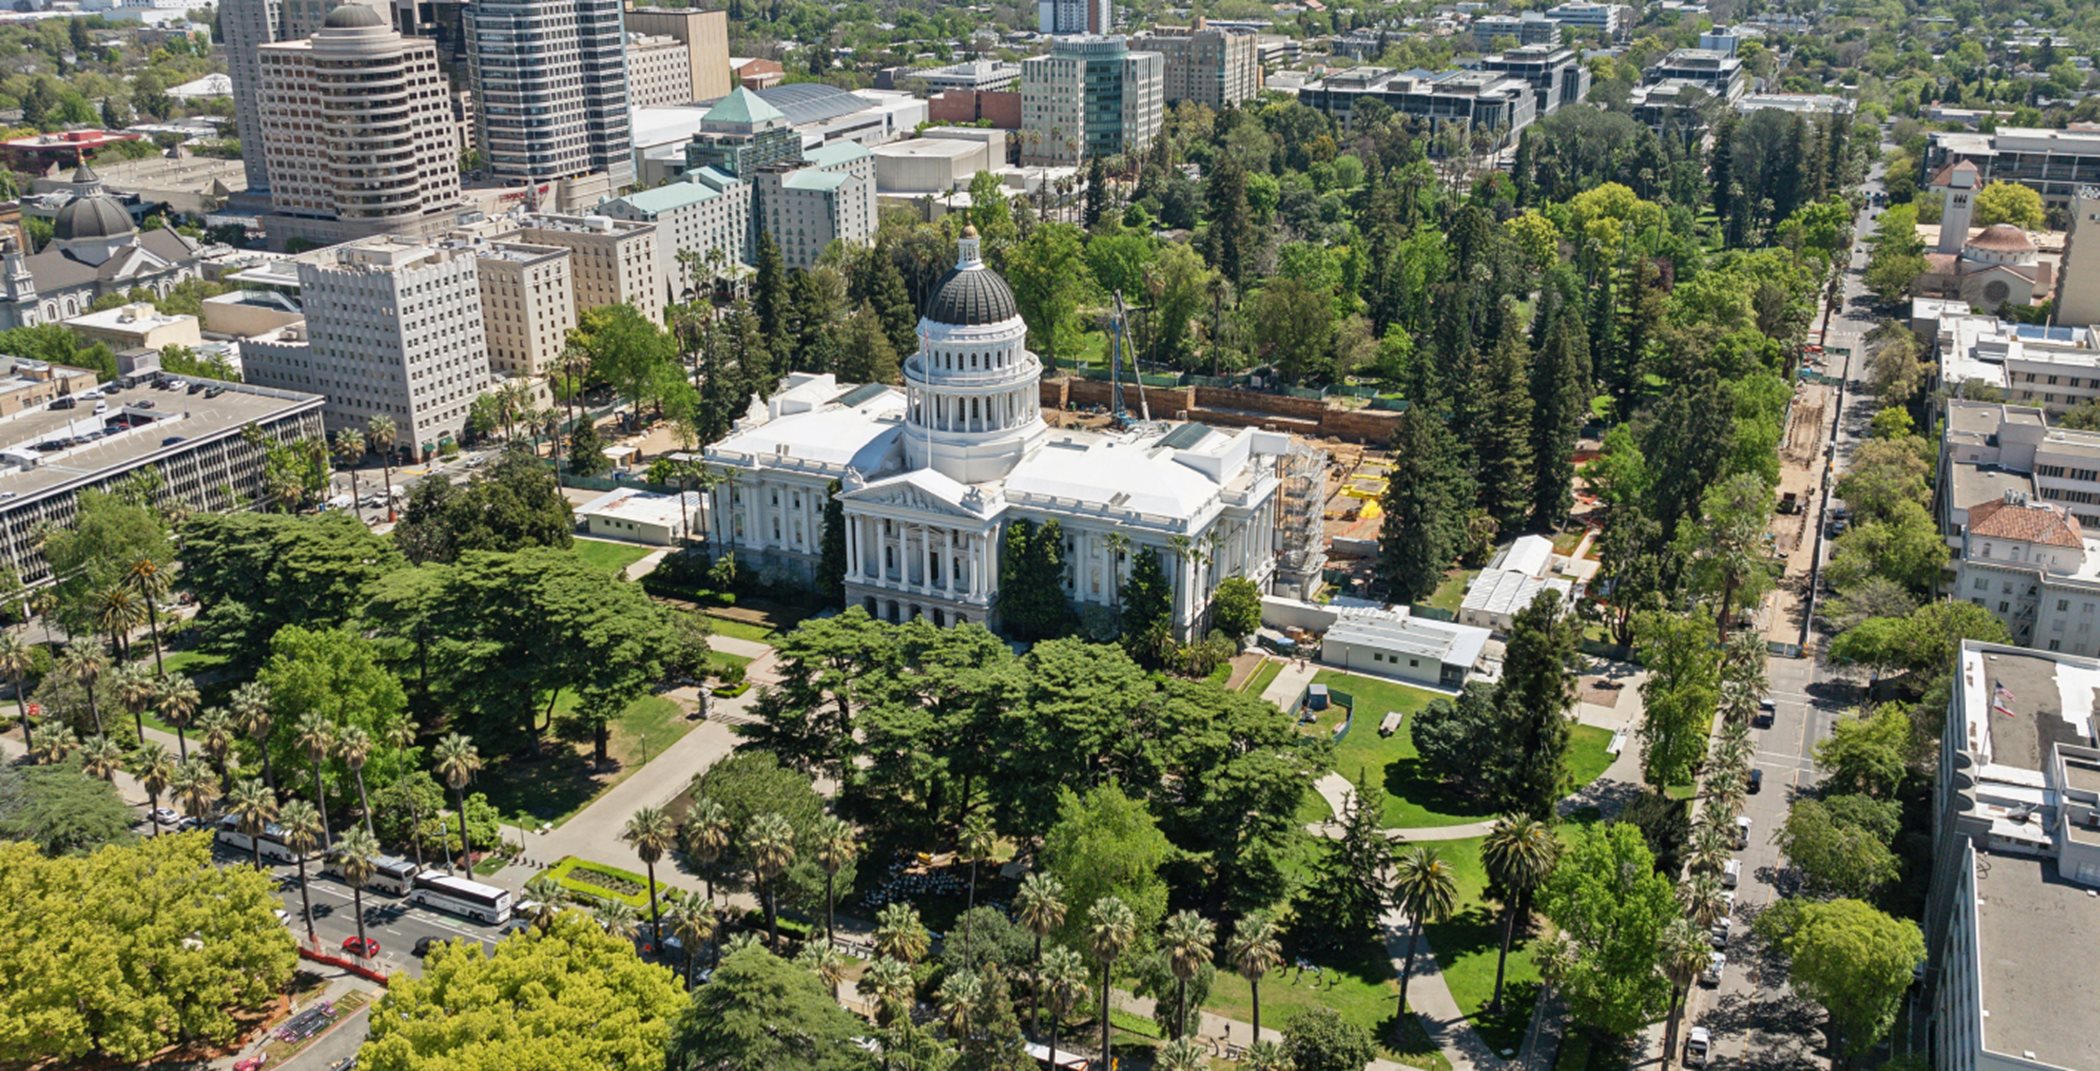 Aerial view of the California State Capitol building and park